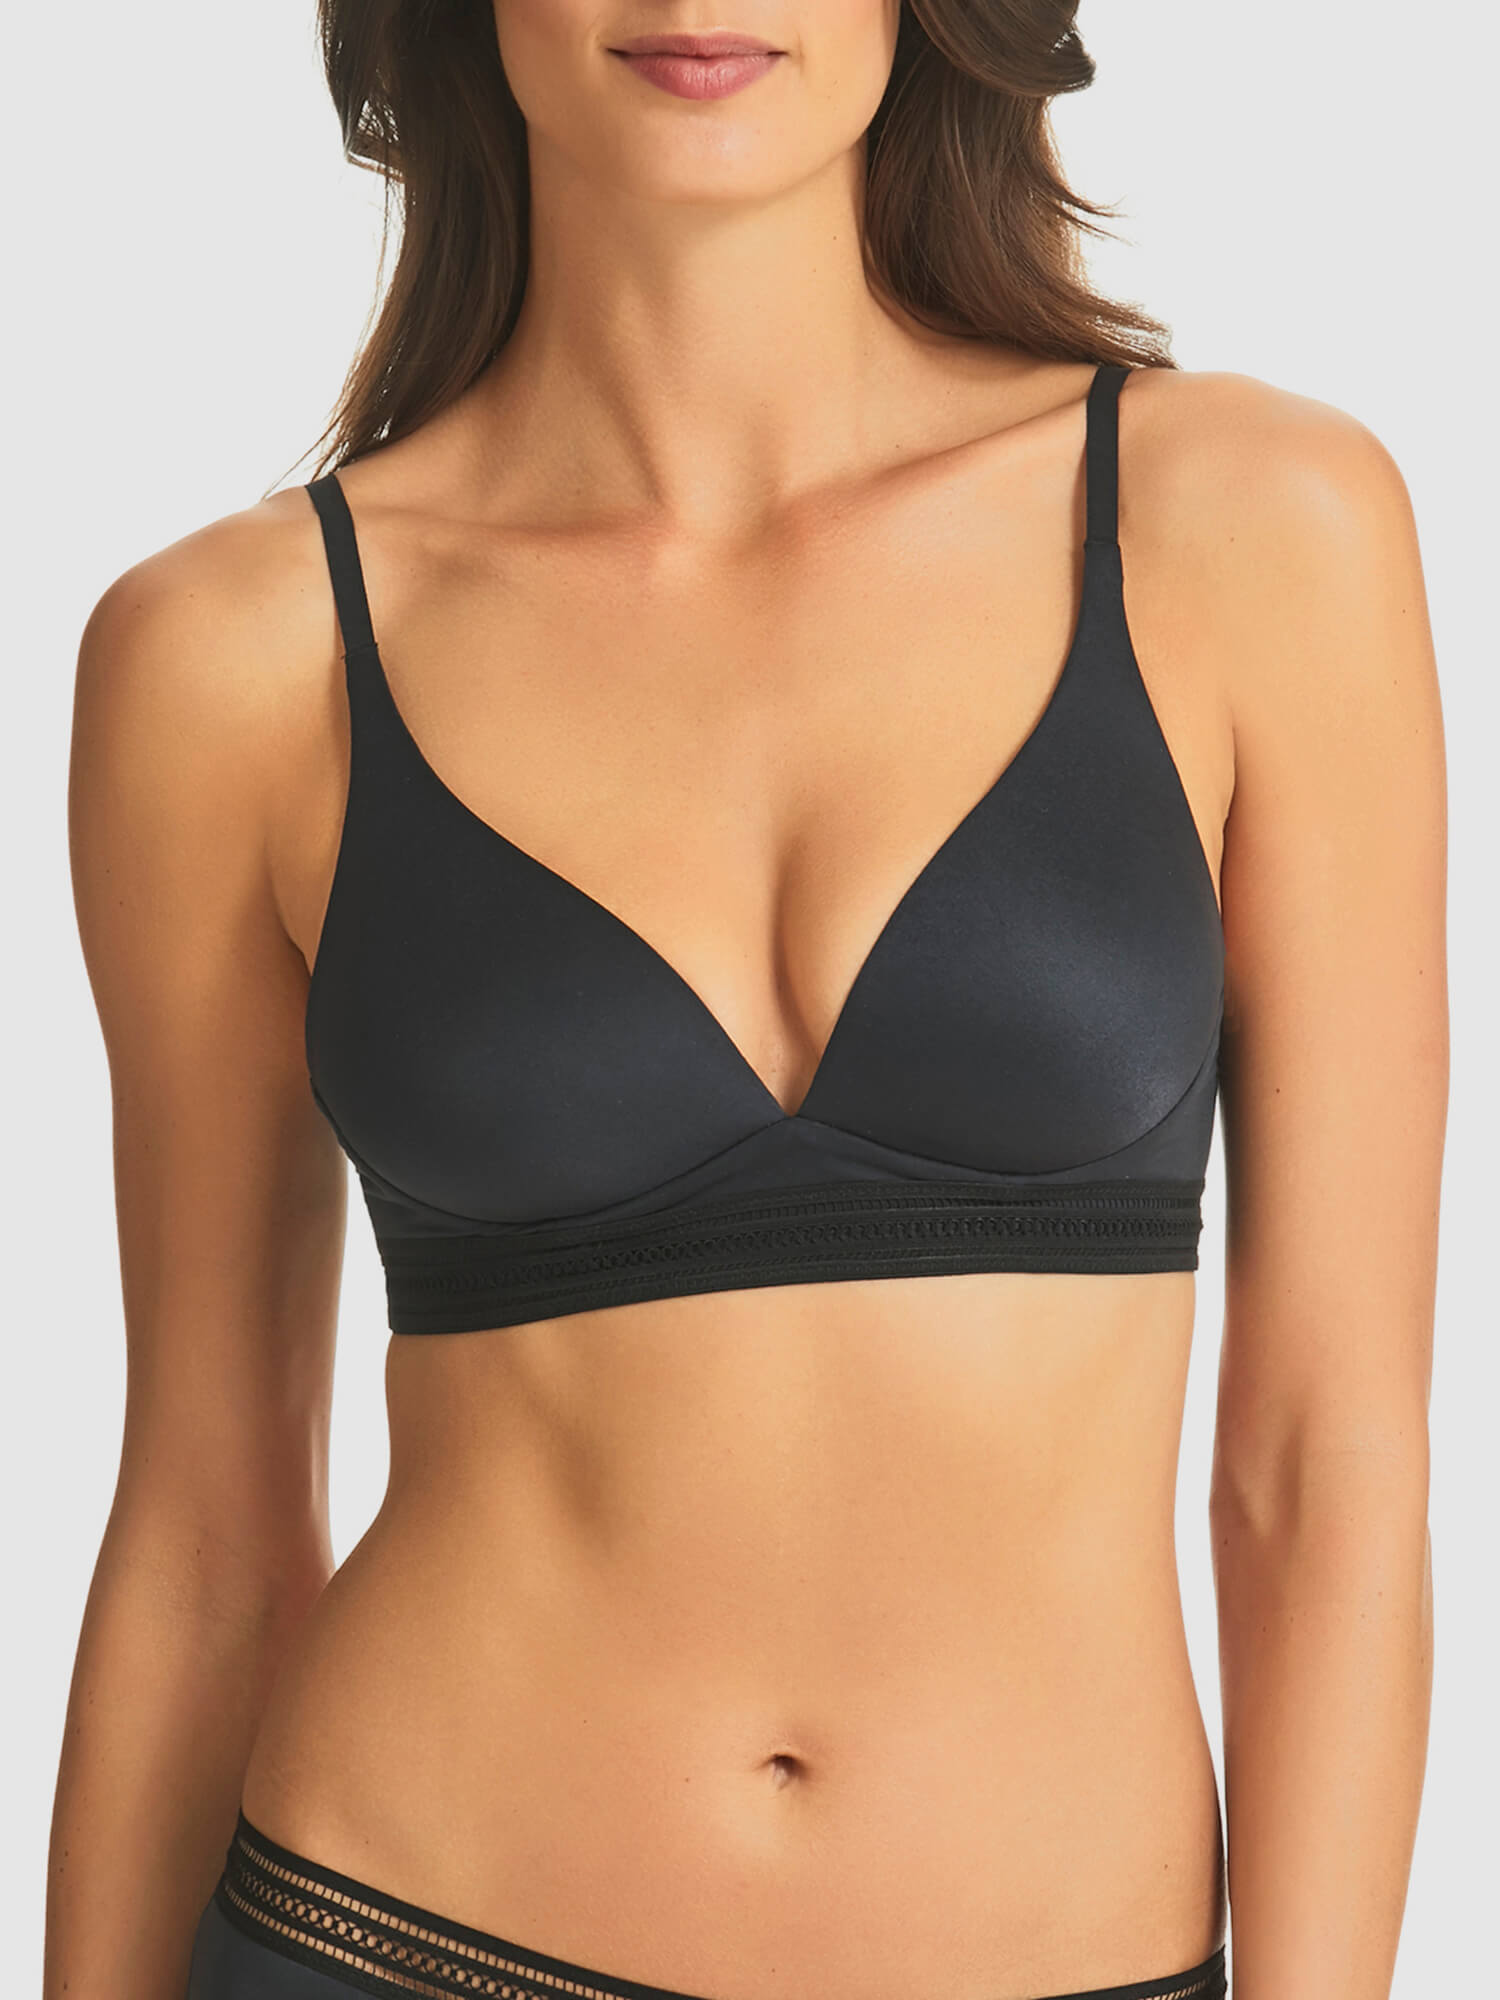 How to STOP Bras From Riding Up (And Why it Happens) –